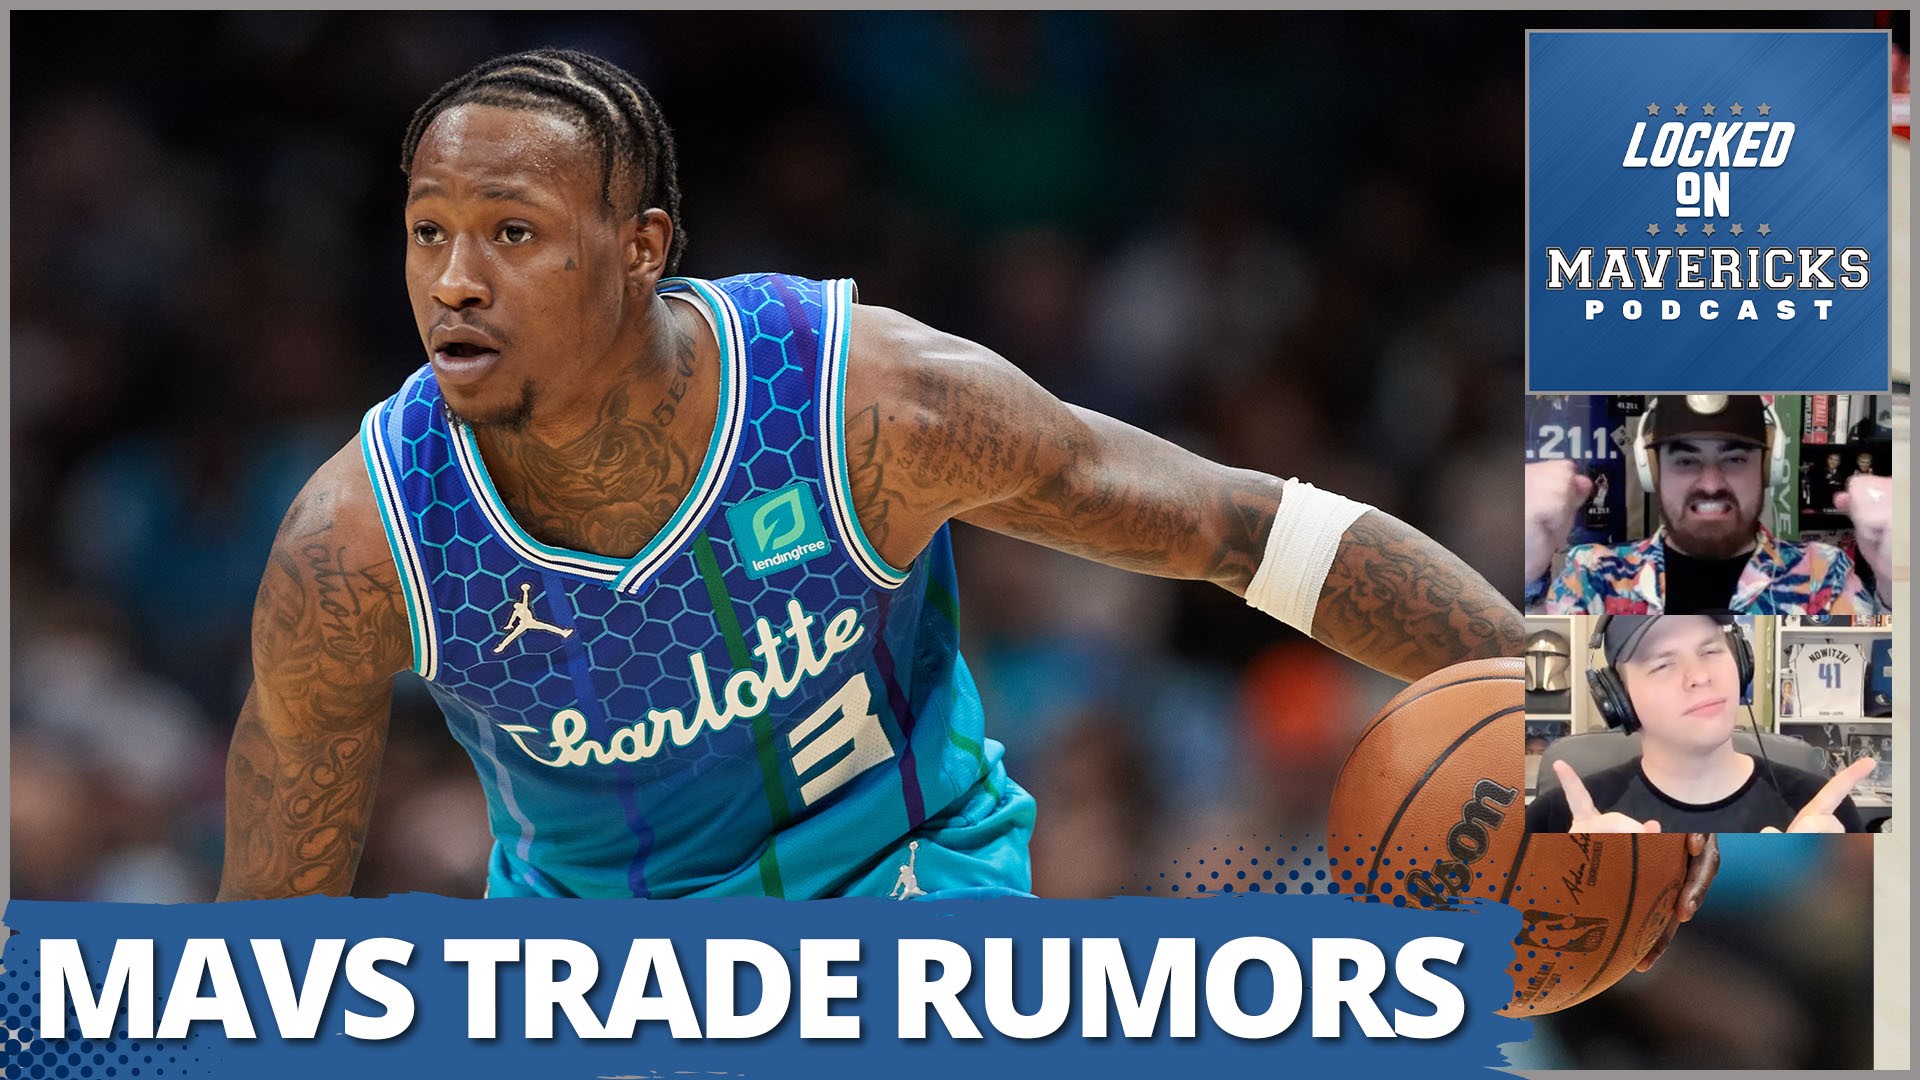 Nick Angstadt & Isaac Harris discuss the NBA Trade Rumors around the Mavs and players around the league like Terry Rozier.